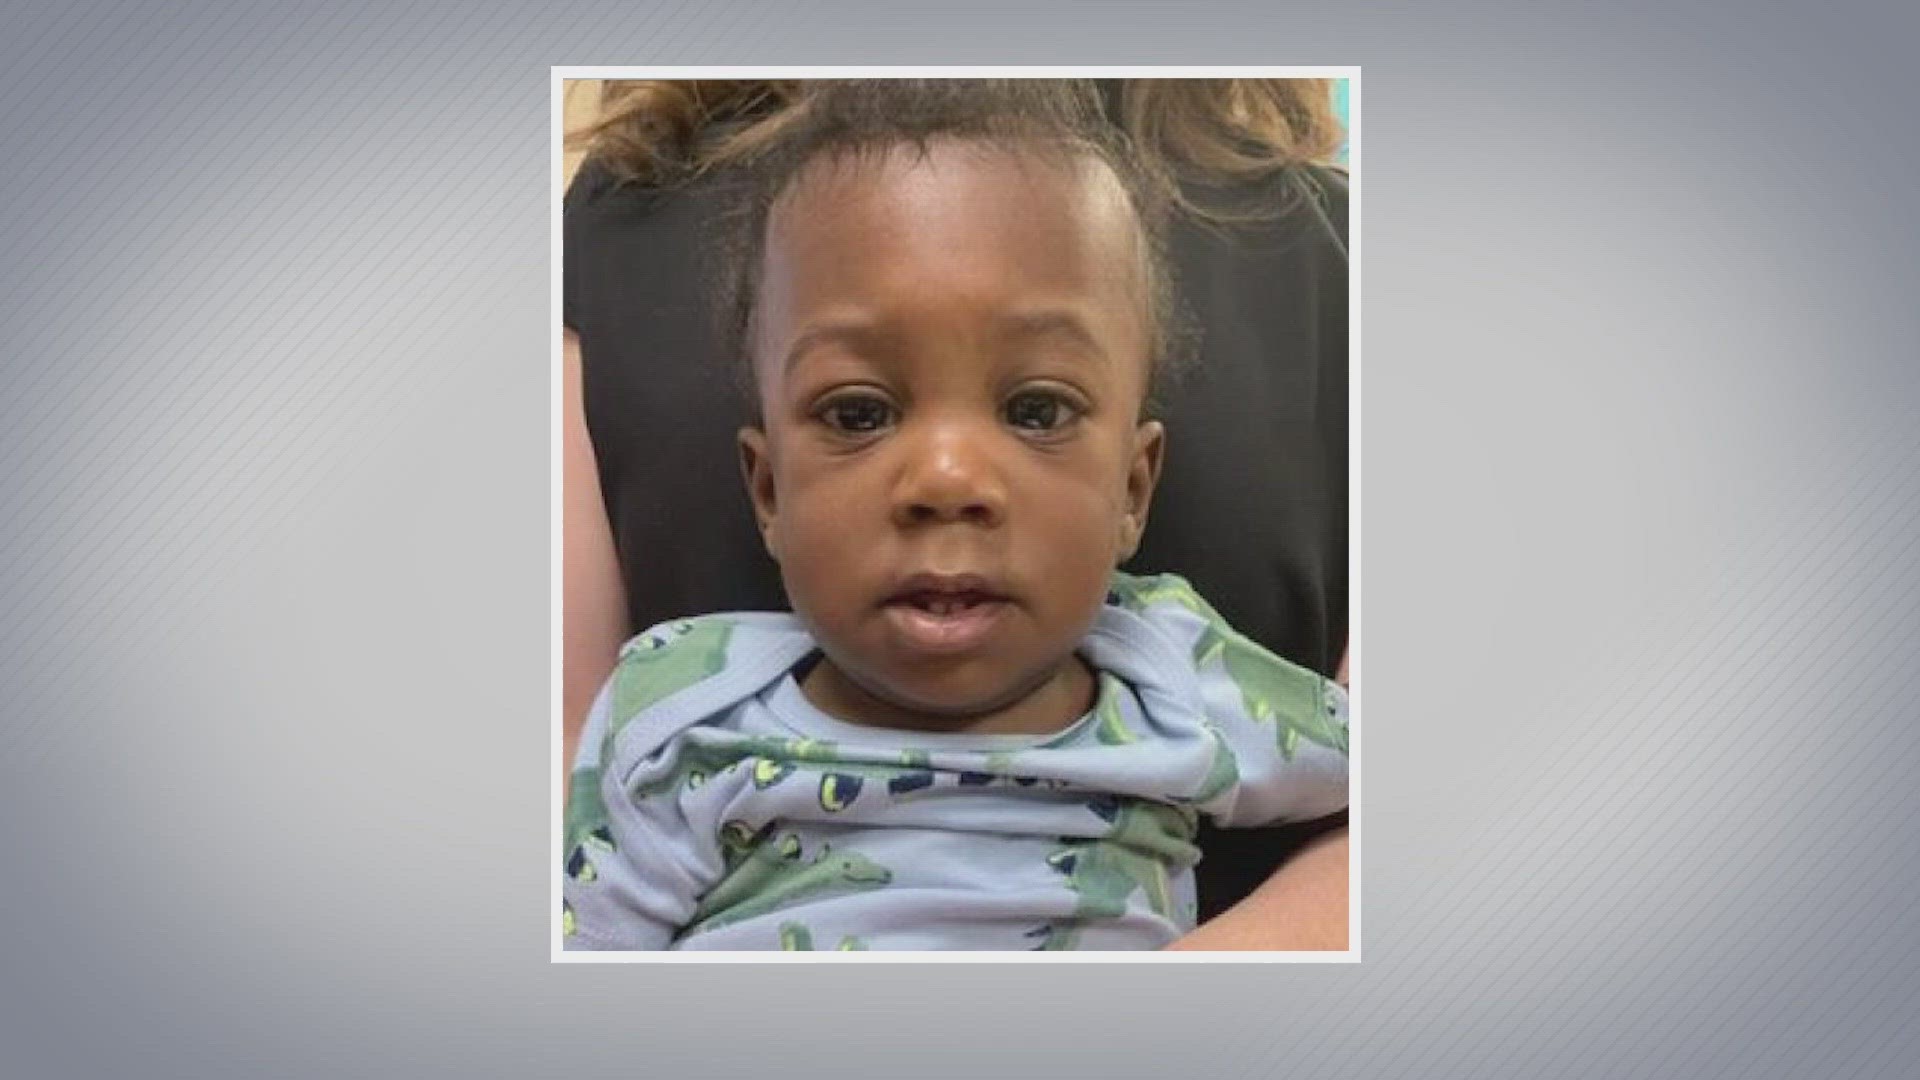 Police are looking for the family of a baby who was found in a car seat outside of a home in southeast Houston.